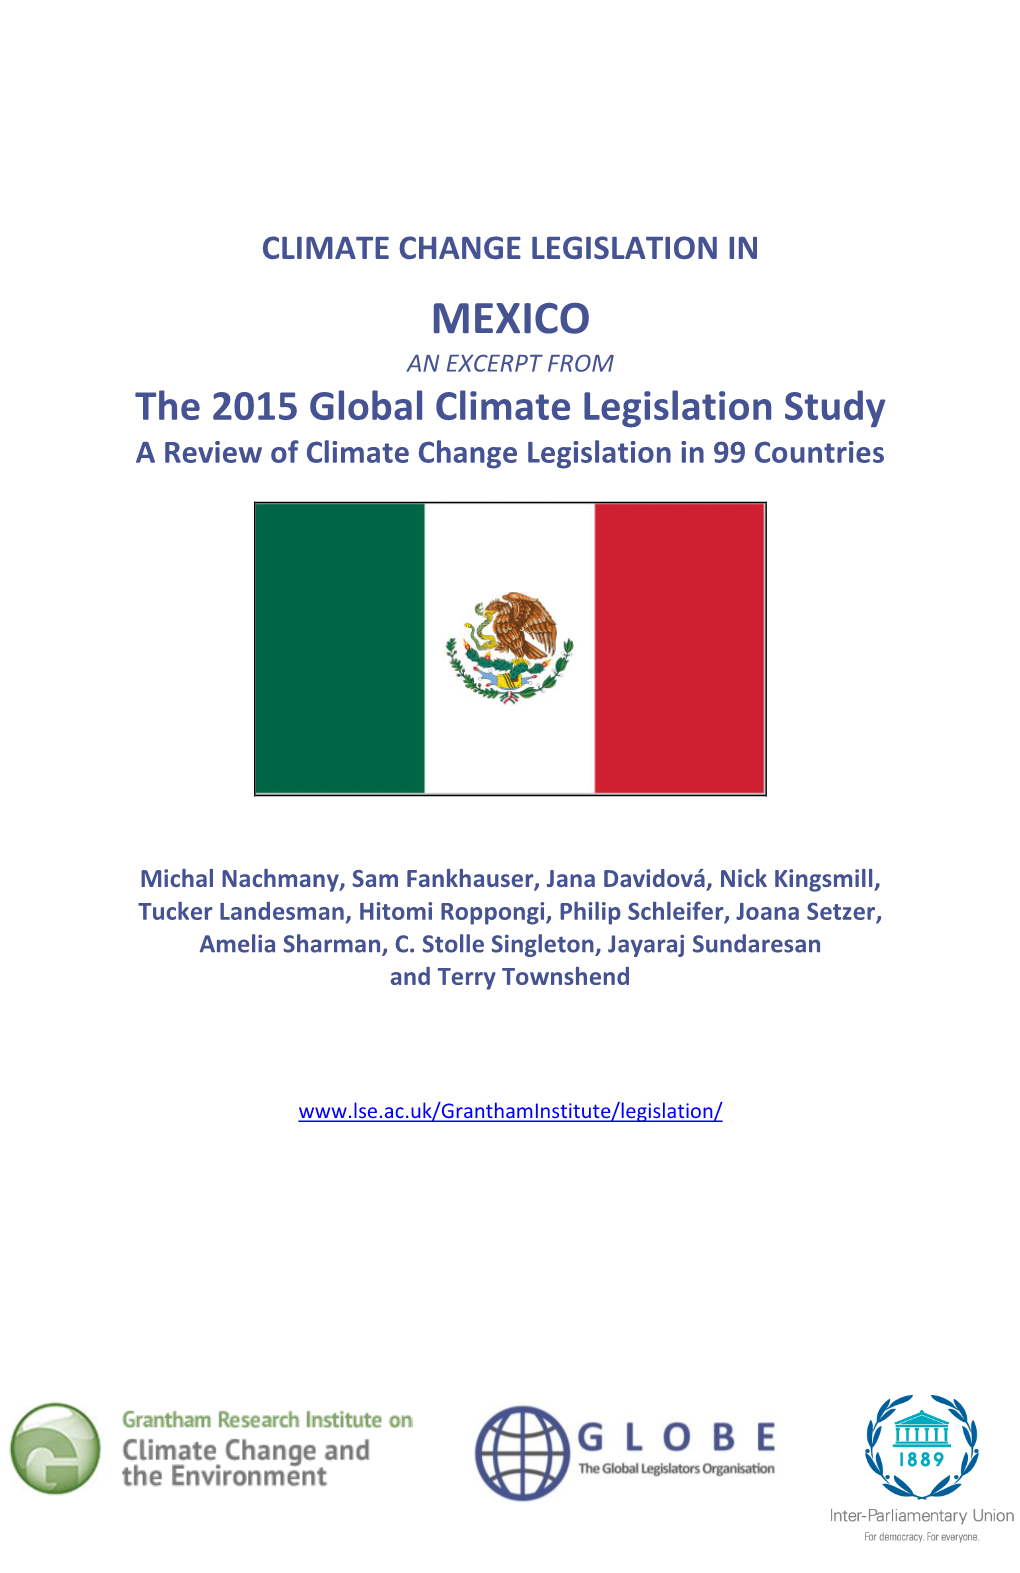 MEXICO an EXCERPT from the 2015 Global Climate Legislation Study a Review of Climate Change Legislation in 99 Countries